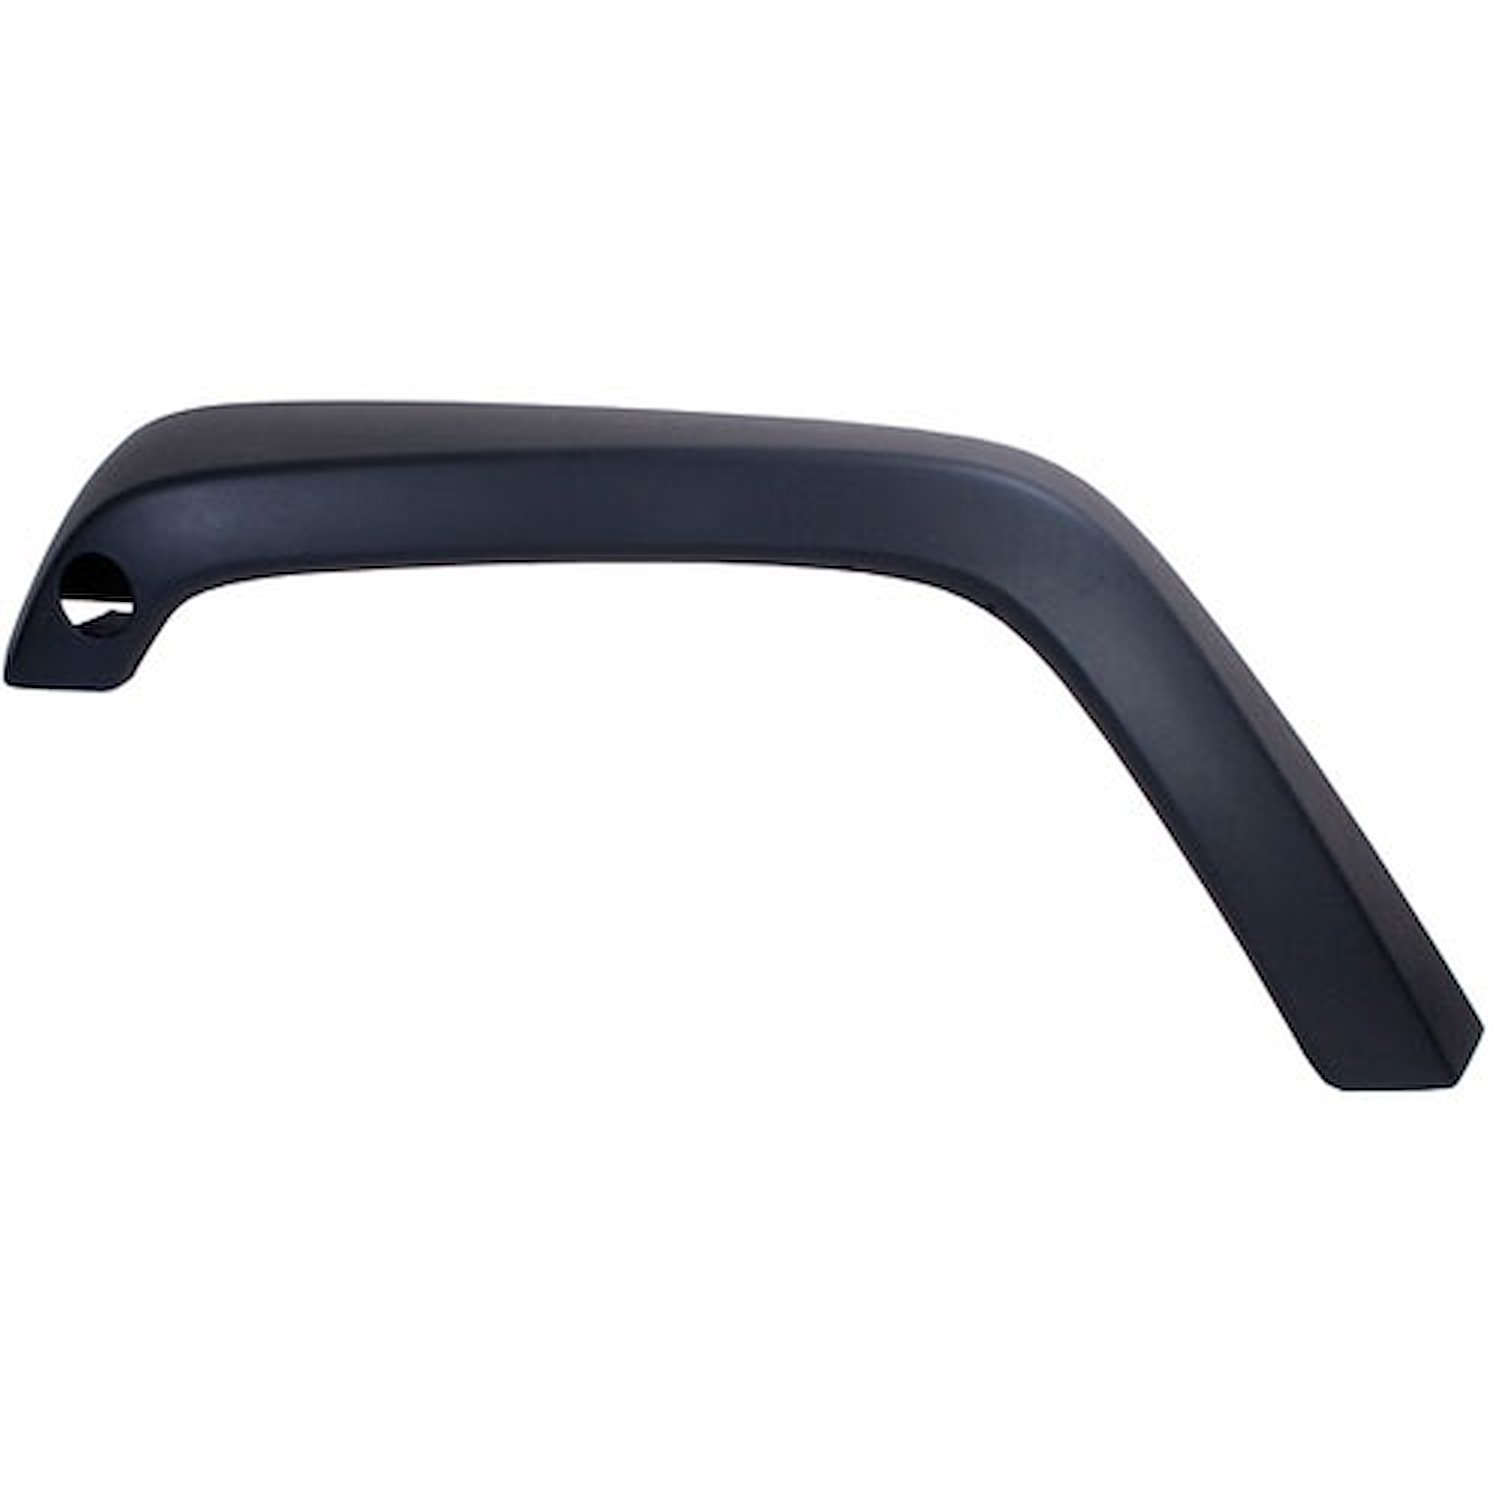 Replacement front fender flare , Fits 07-14 Jeep Wrangler, left side.